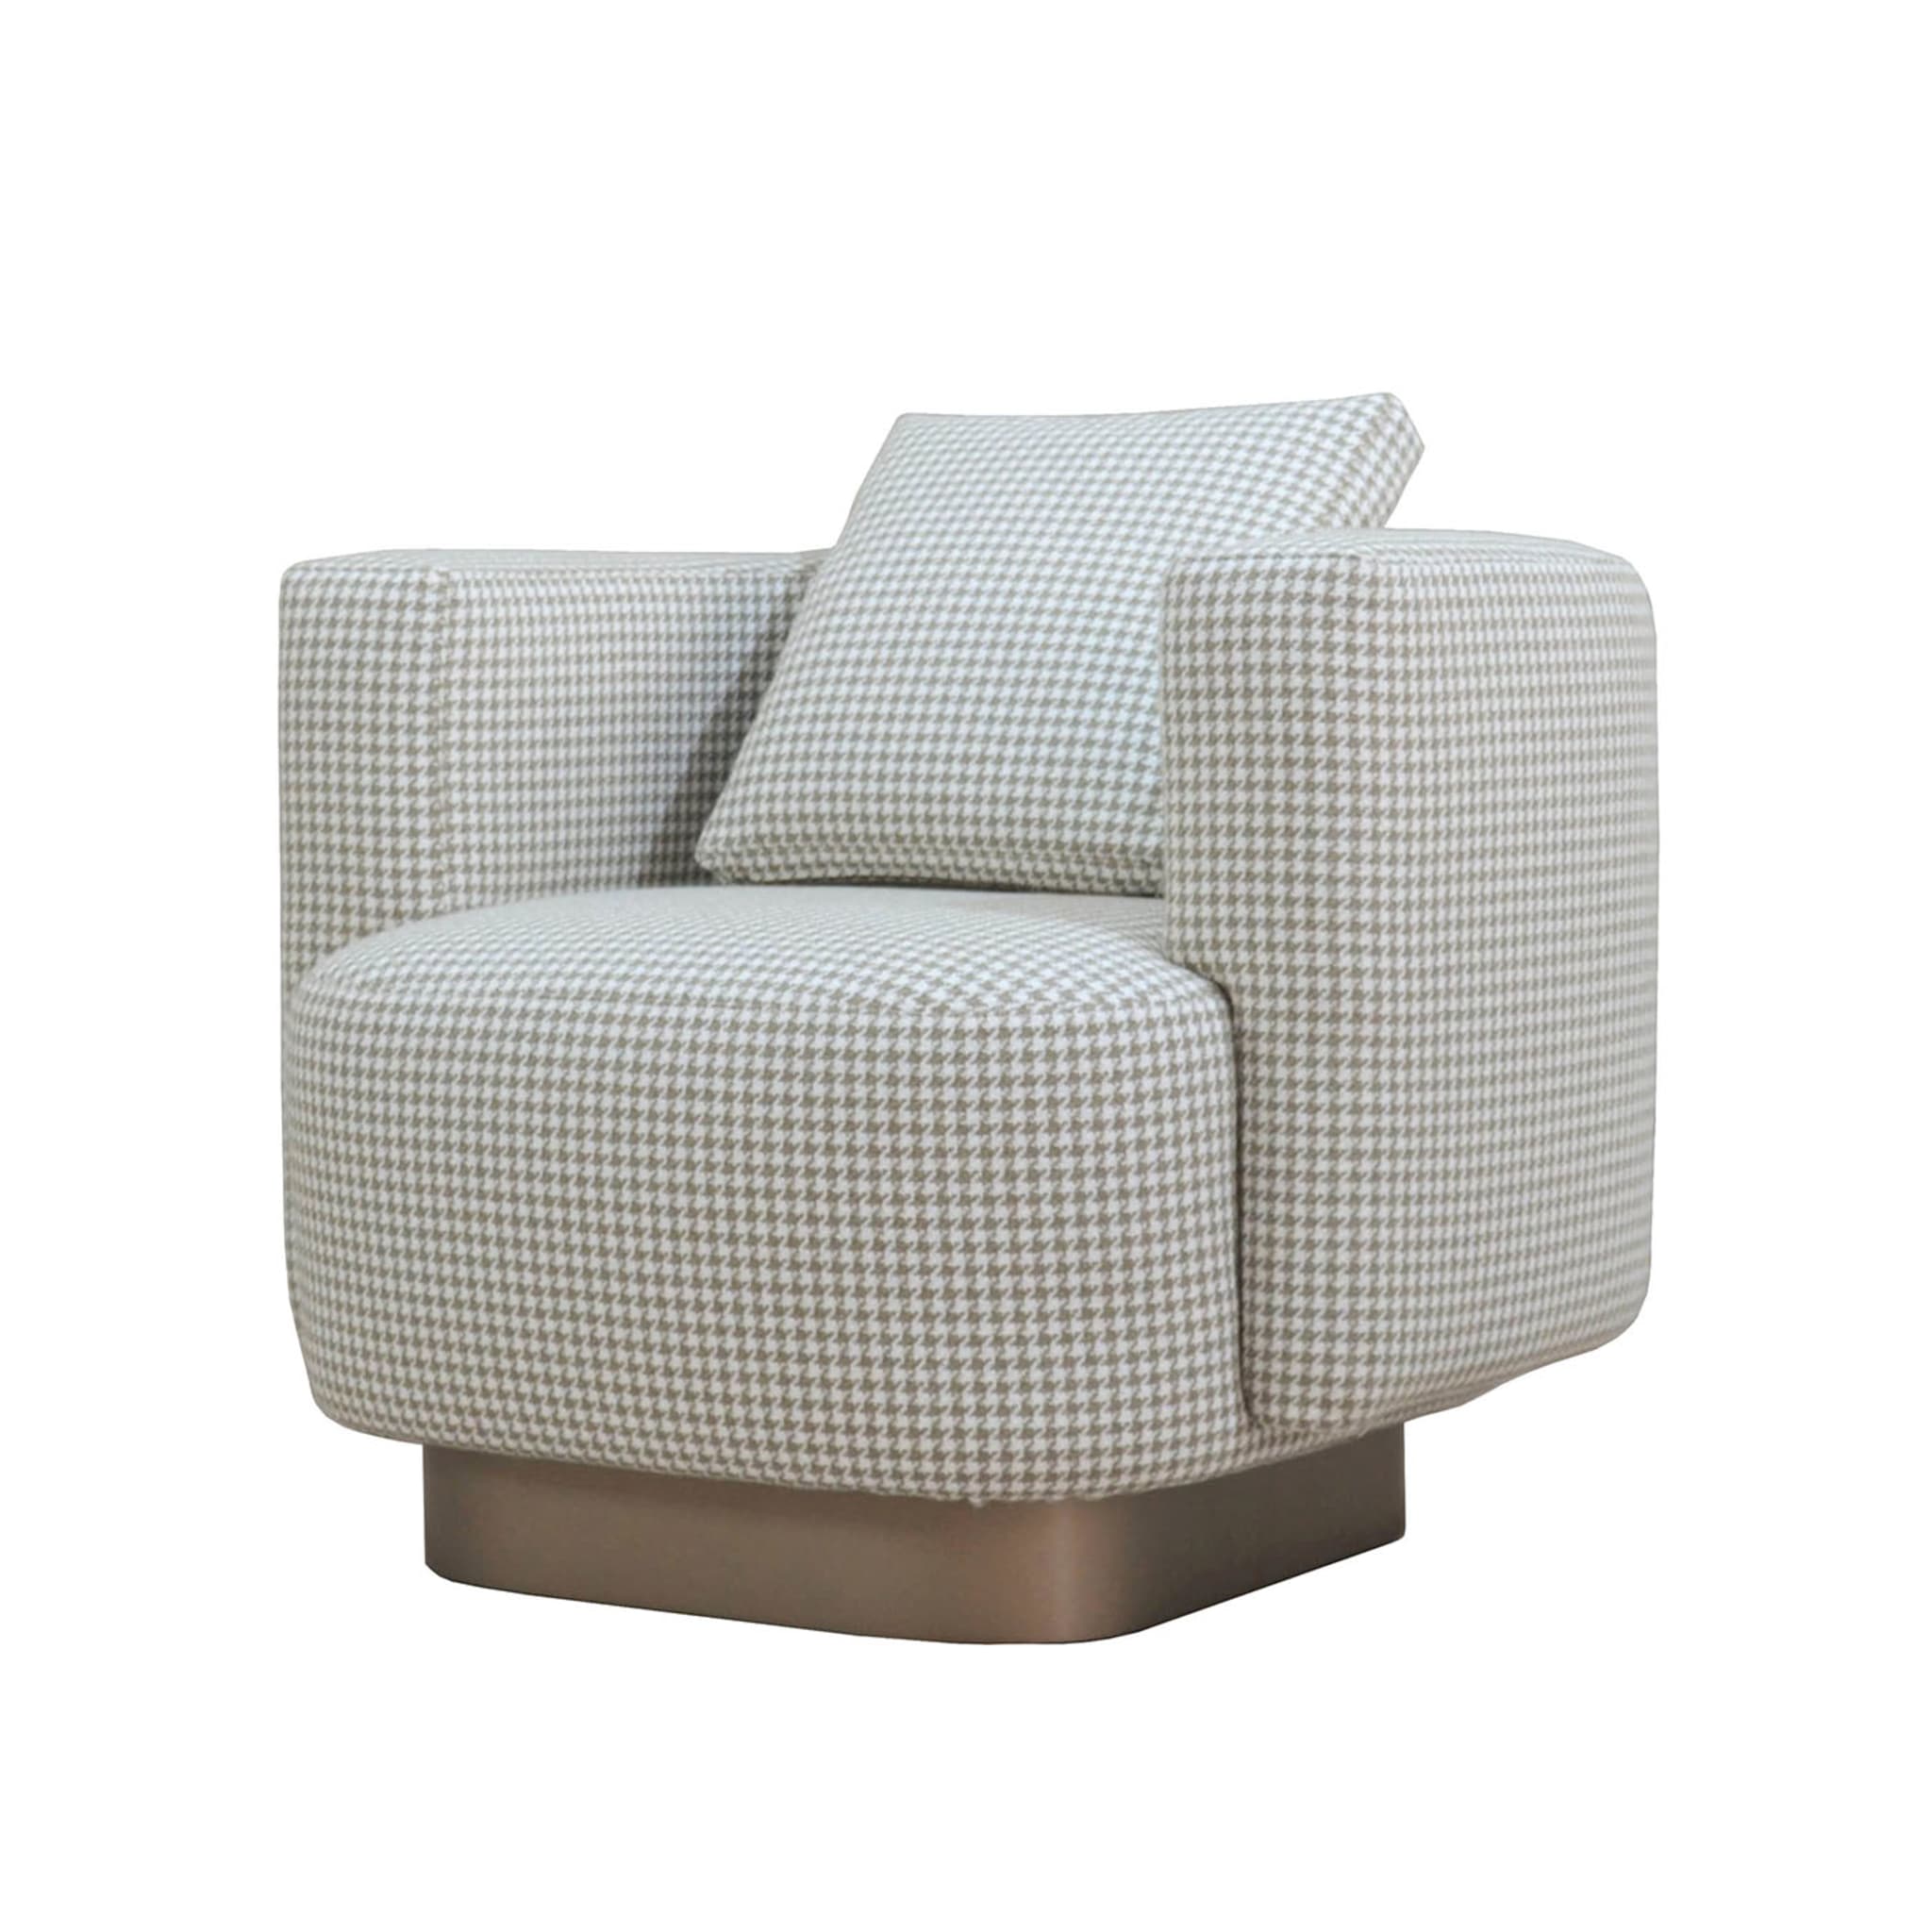  Italian Contemporary Lounge Upholstered Armchair  - Alternative view 2